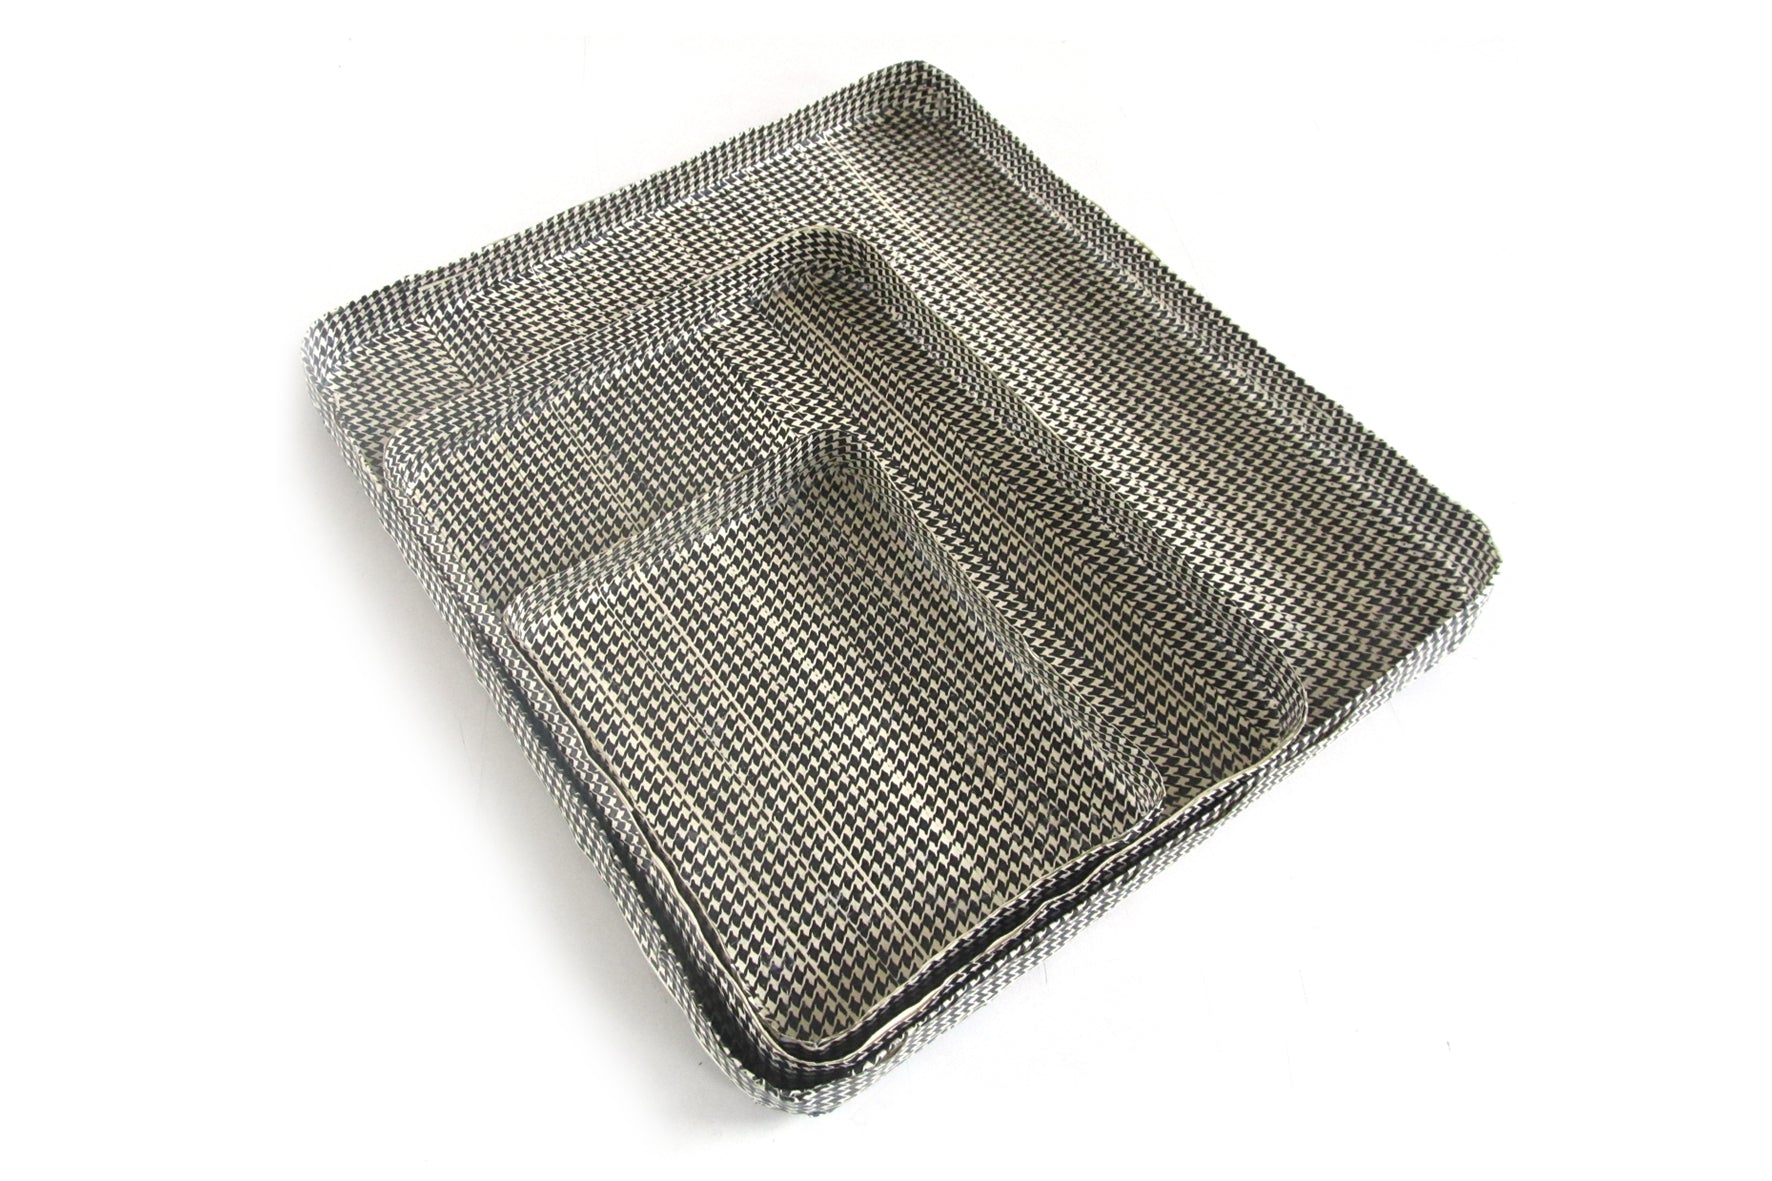 Printed paper strips tray